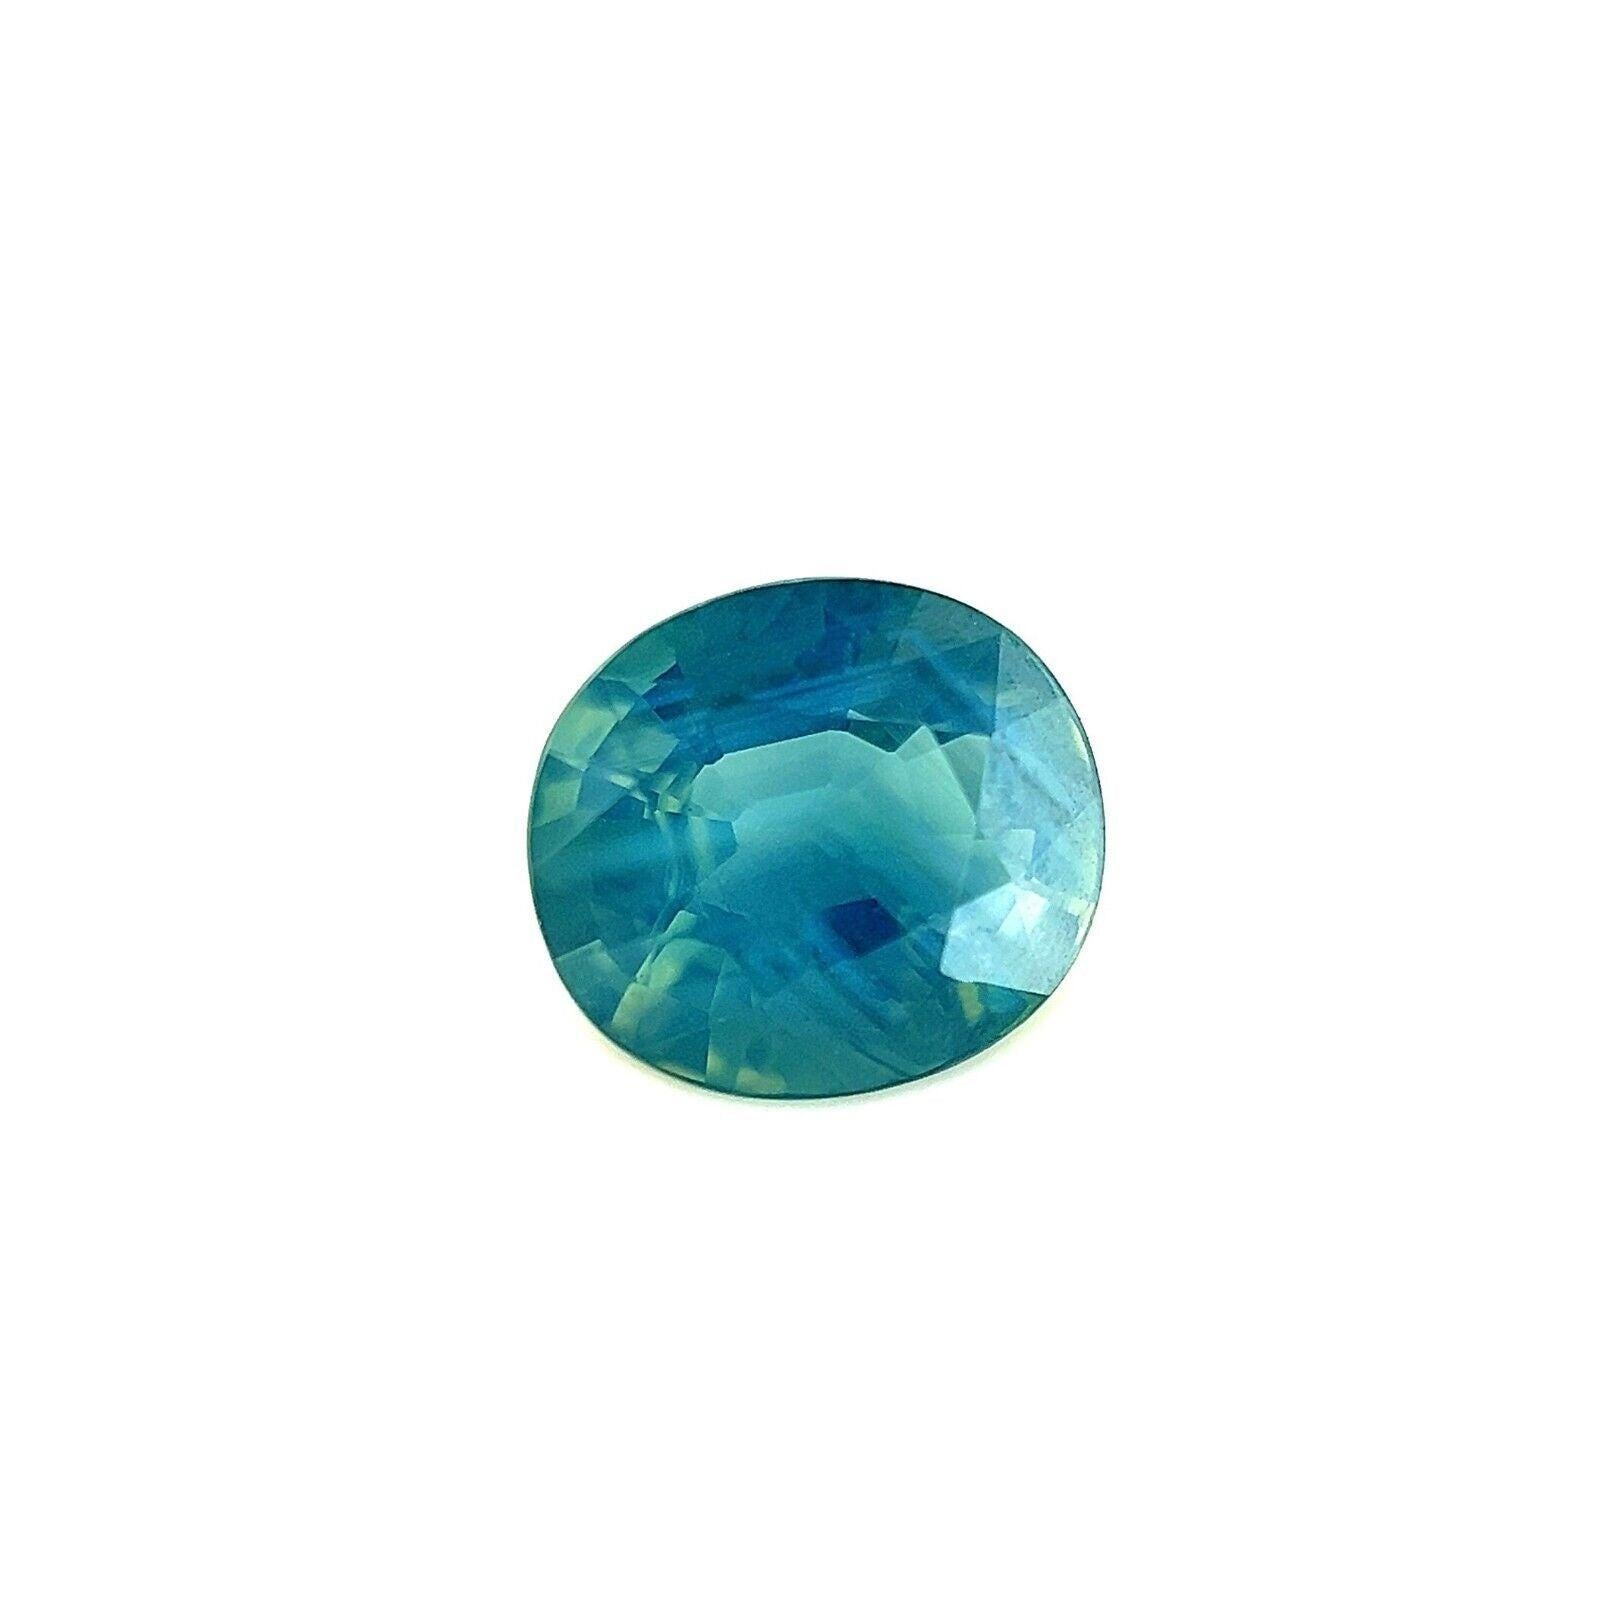 1.08ct Unique Vivid Green Blue Sapphire GRA Certified Oval Cut Gem 6.7x5.9mm

GRA Certified Unique Green Blue Sapphire Gemstone.
1.08 Carat sapphire with a beautiful green blue colour. Fully certified by GRA confirming stone as natural. Also has